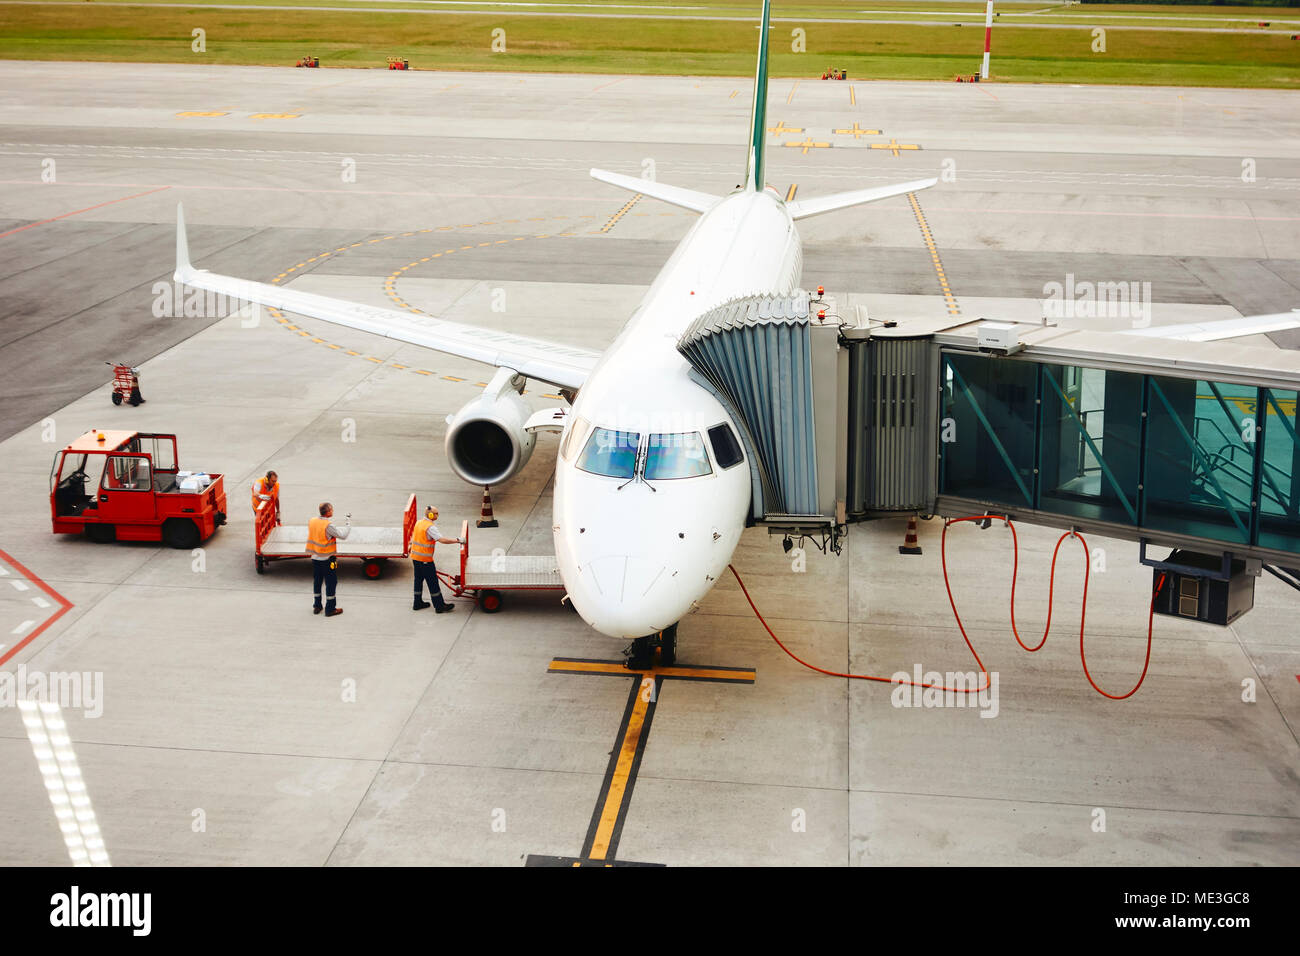 A passenger jet airplane docked at an airport stand. Stock Photo